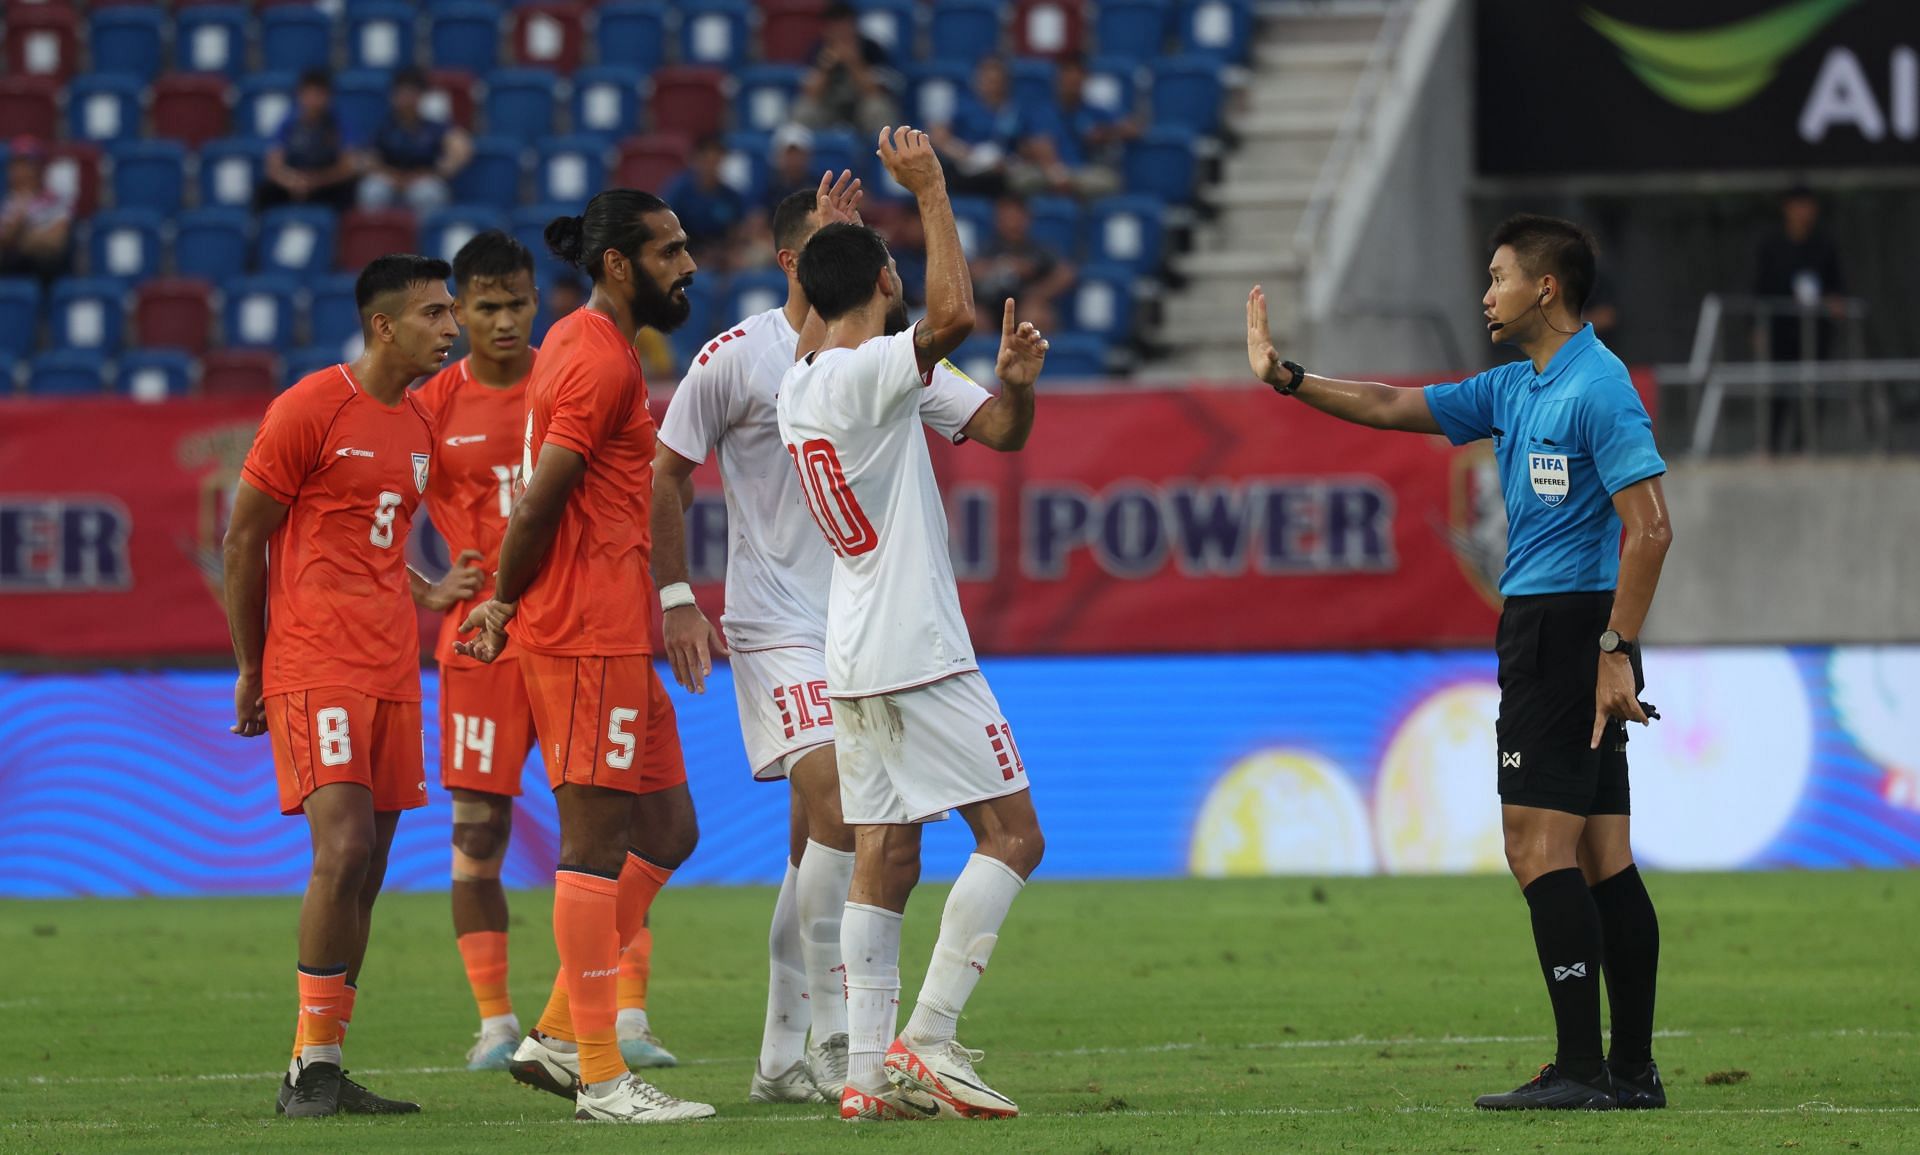 India were dominant in possession but faltered in the final third.